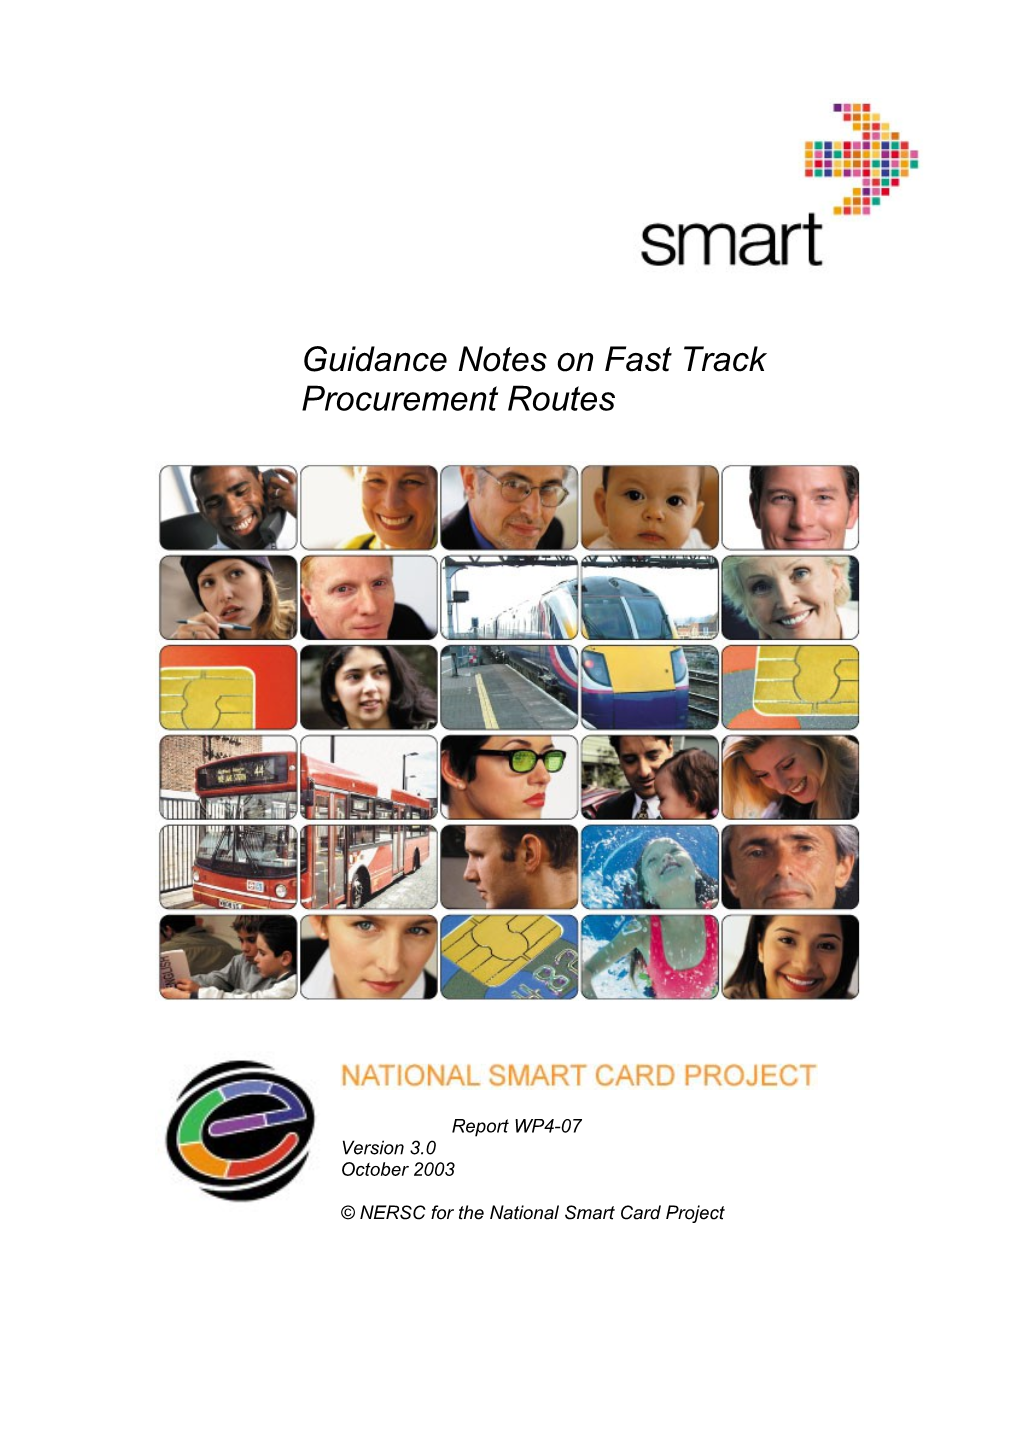 Guidance Notes on Fast Track Procurement Routes